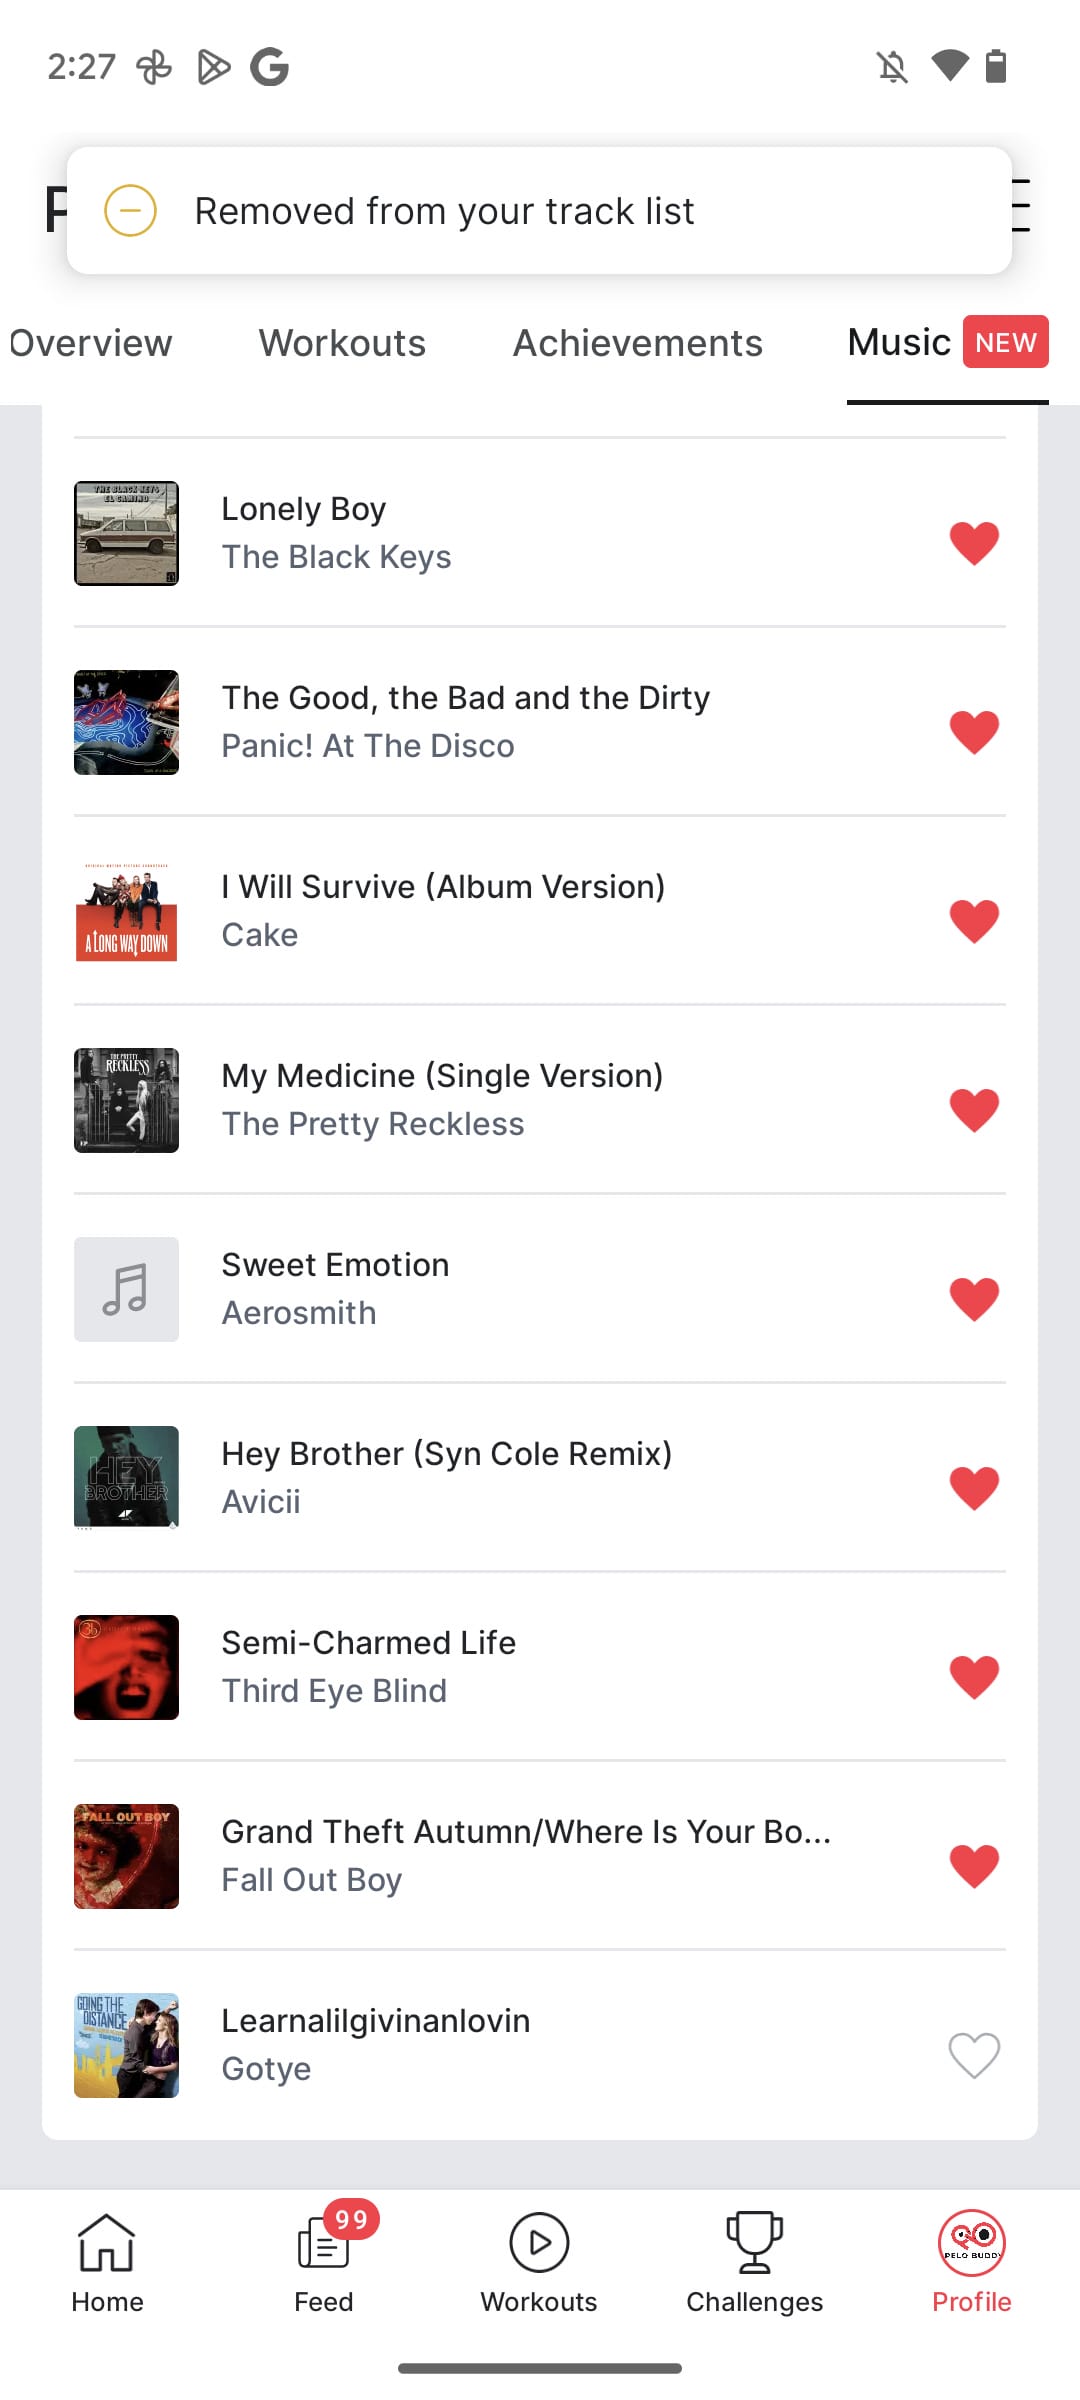 Manage saved songs via profile in the Android app.